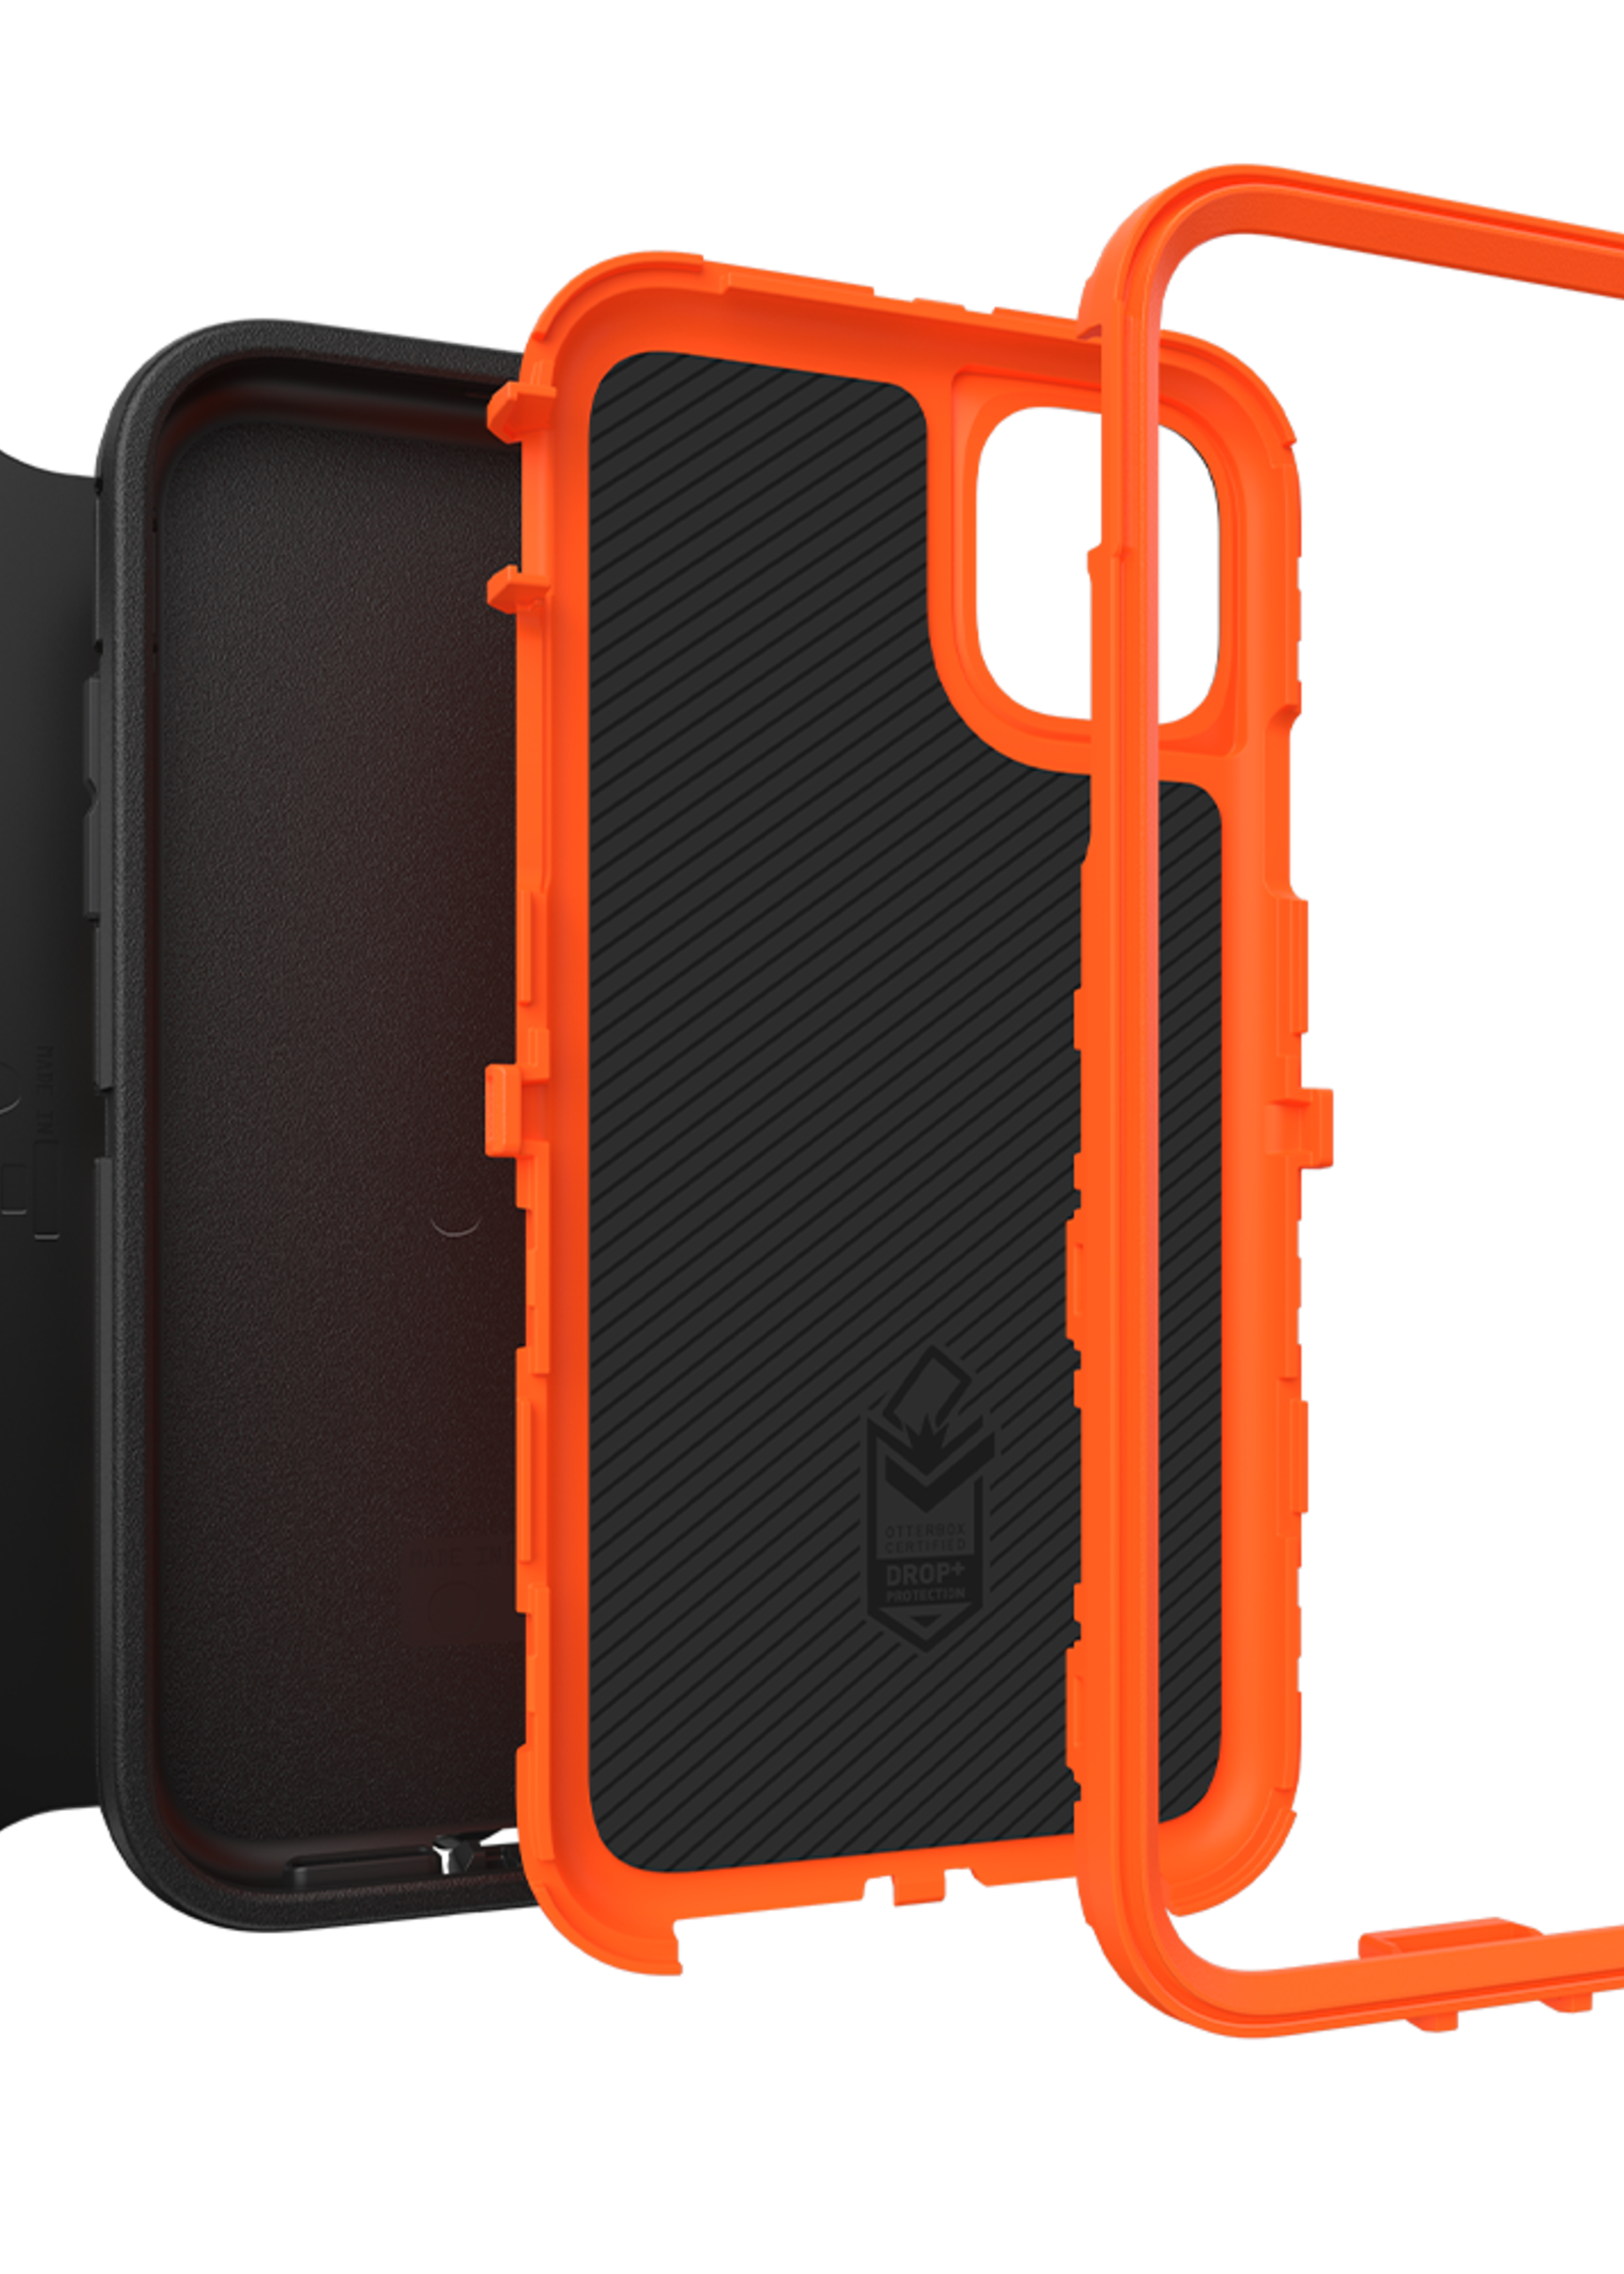 Otterbox OtterBox - Defender Case for Apple iPhone 11 - Real Tree Edge